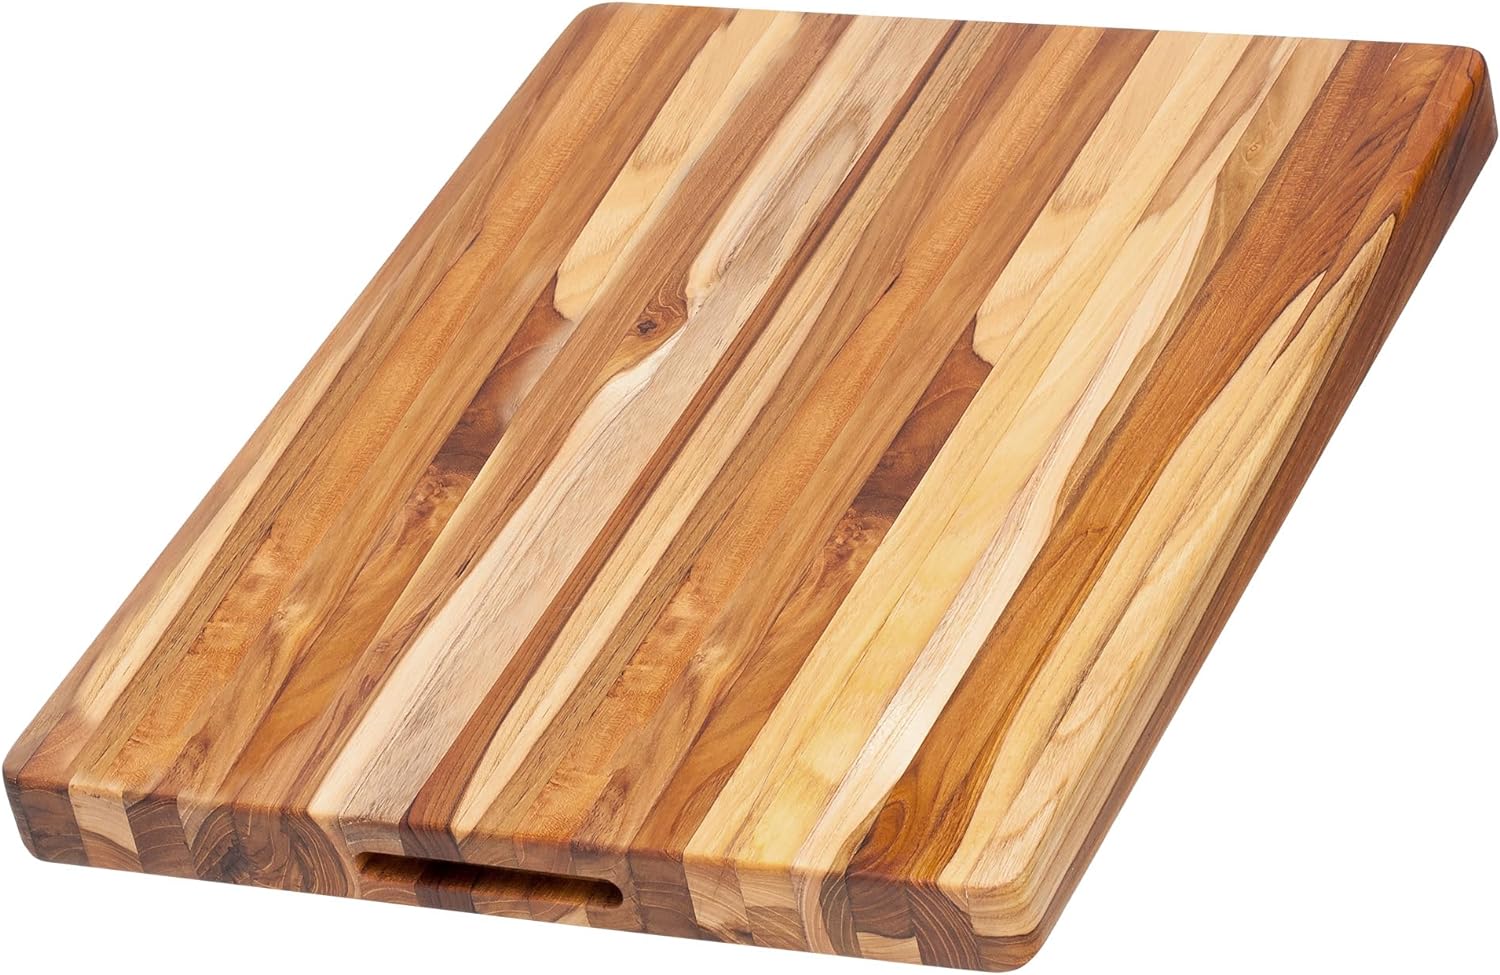 TeakHaus Edge Grain Carving Board w/Hand Grip (Rectangle) | 24" x 18" x 1.5" - image 1 of 6